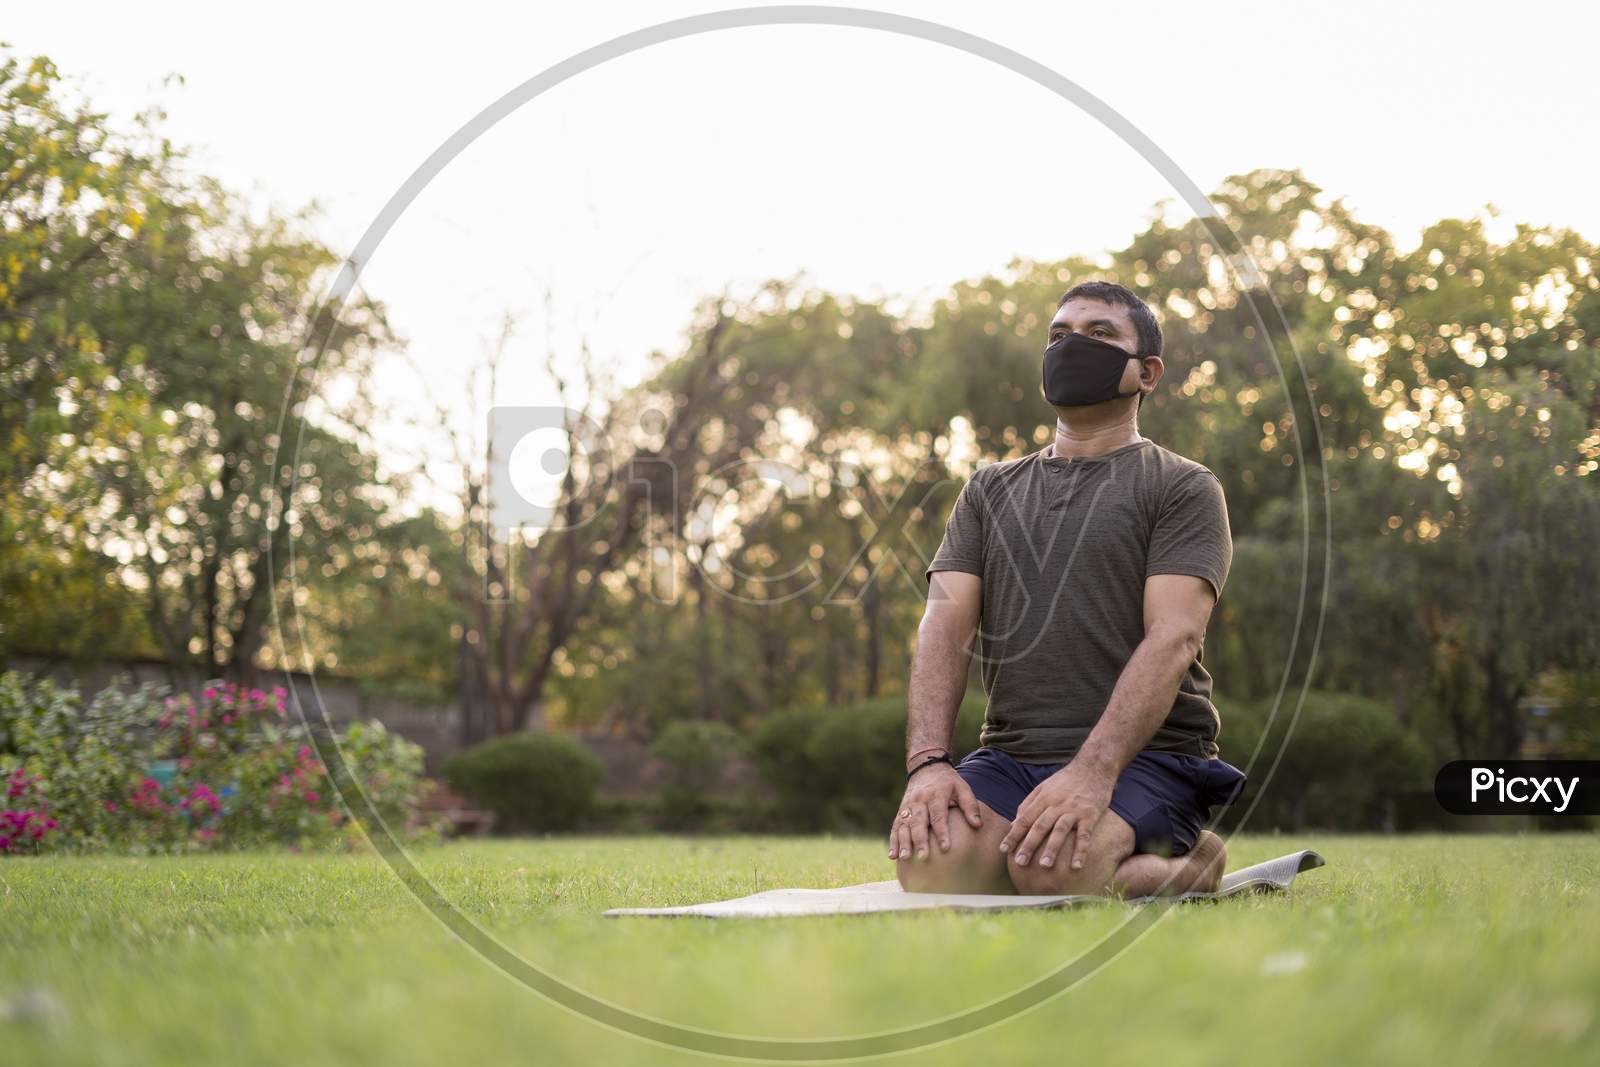 Mid-Aged Man Doing Yoga In A Park Covered With Trees On International Yoga Day.